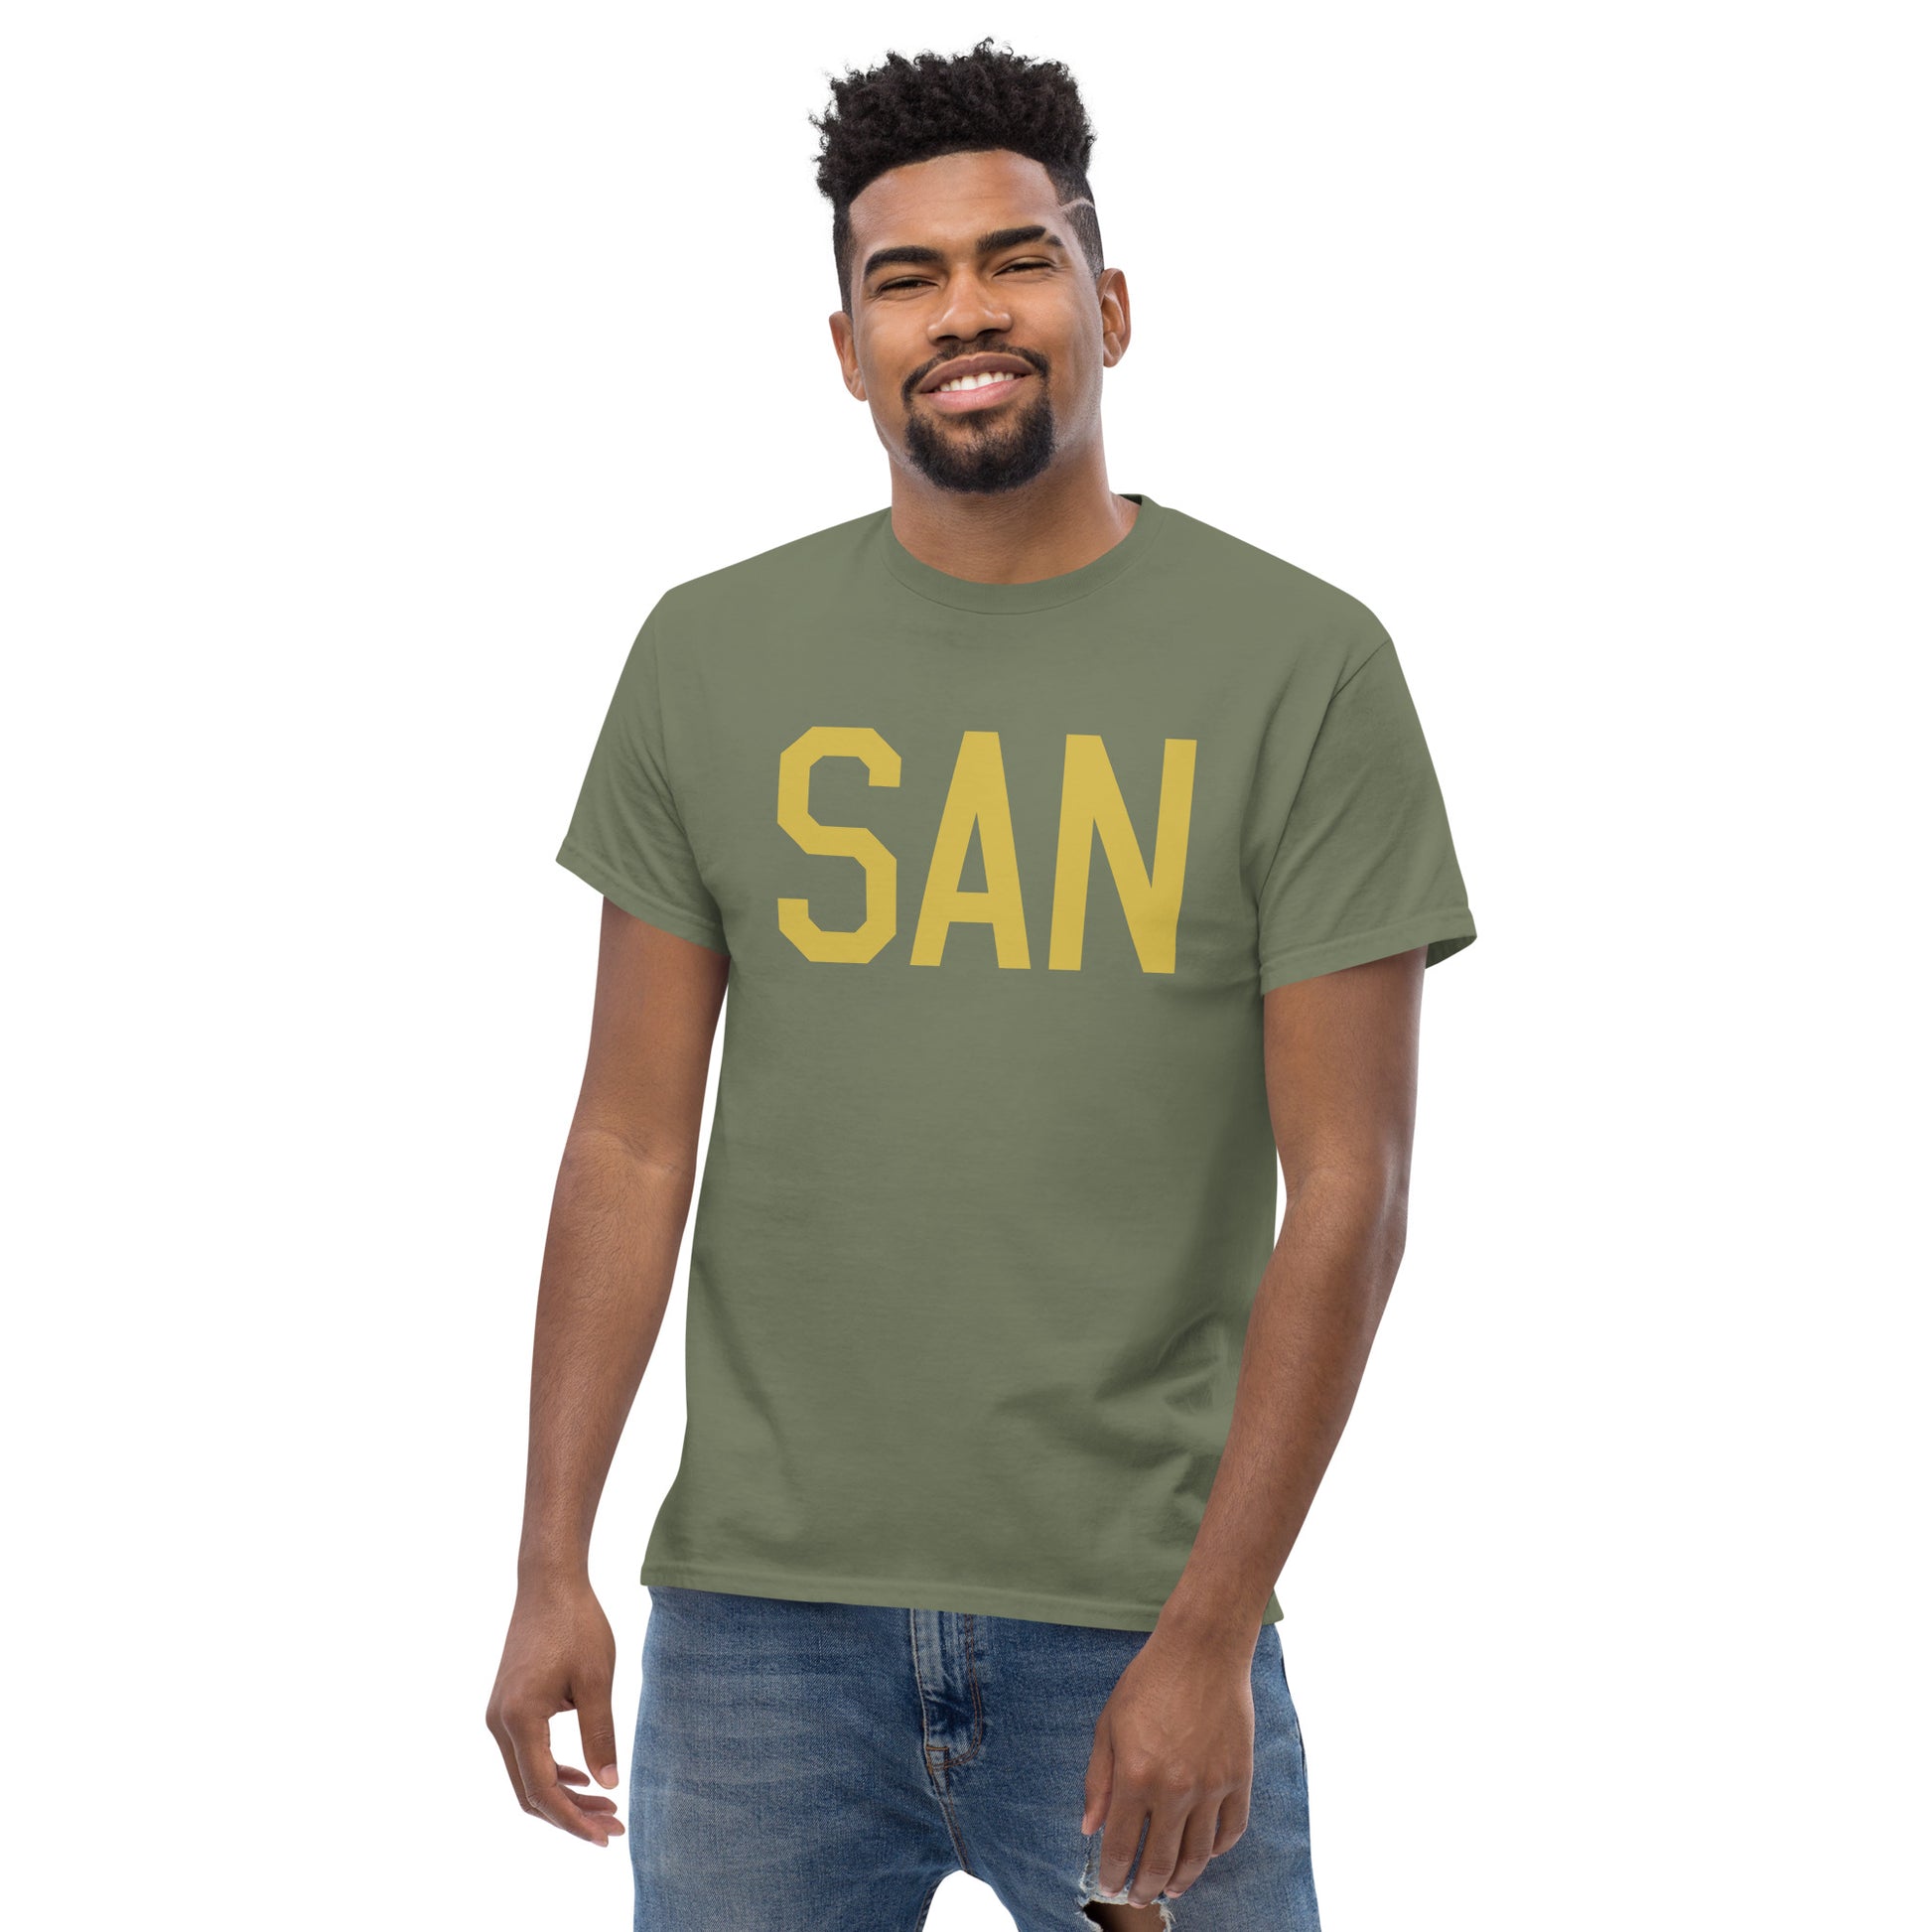 Aviation Enthusiast Men's Tee - Old Gold Graphic • SAN San Diego • YHM Designs - Image 06